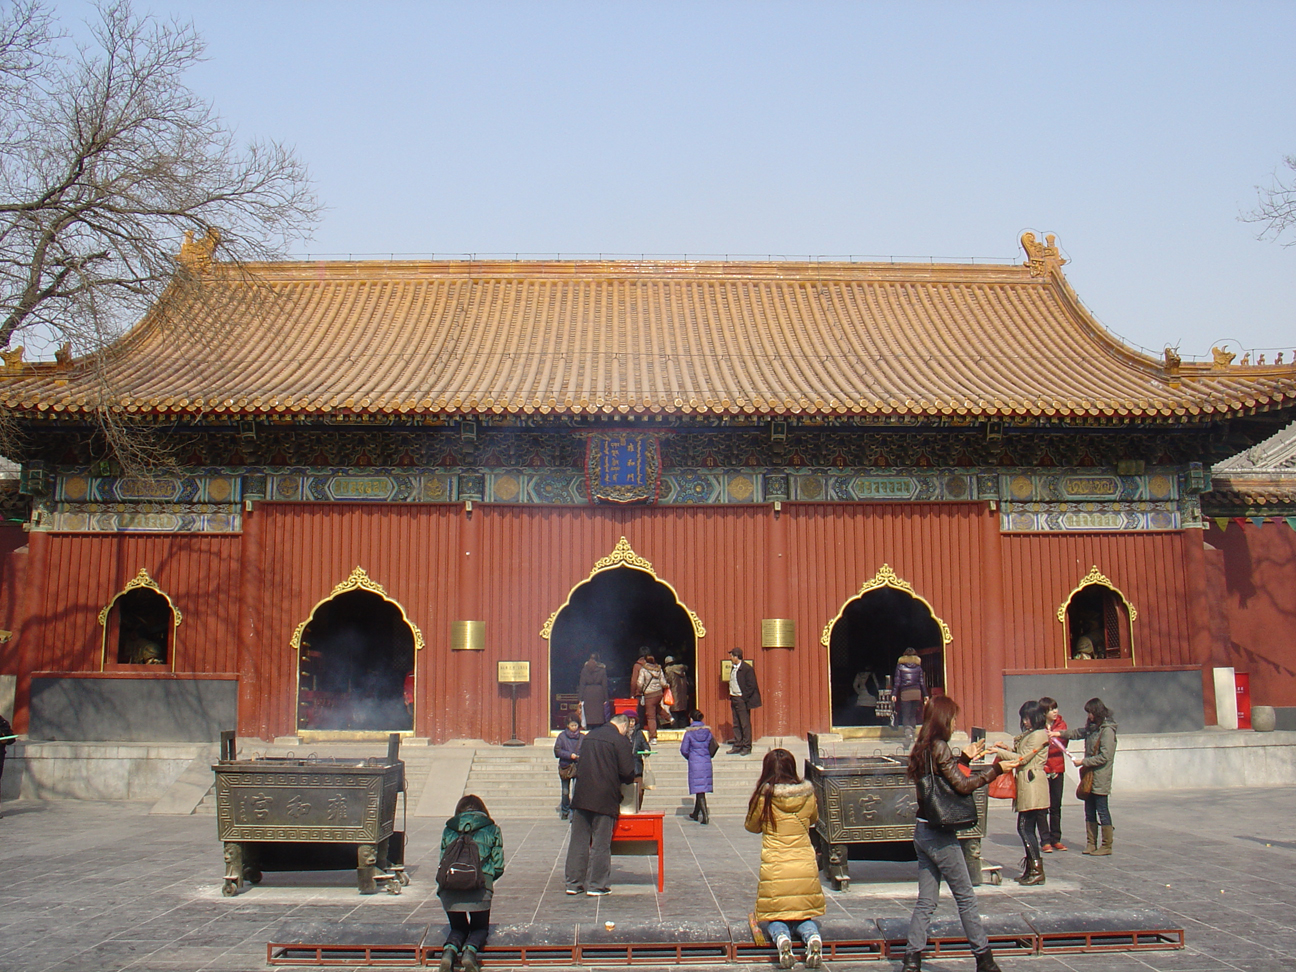 The first main building of the Buddhist Temple